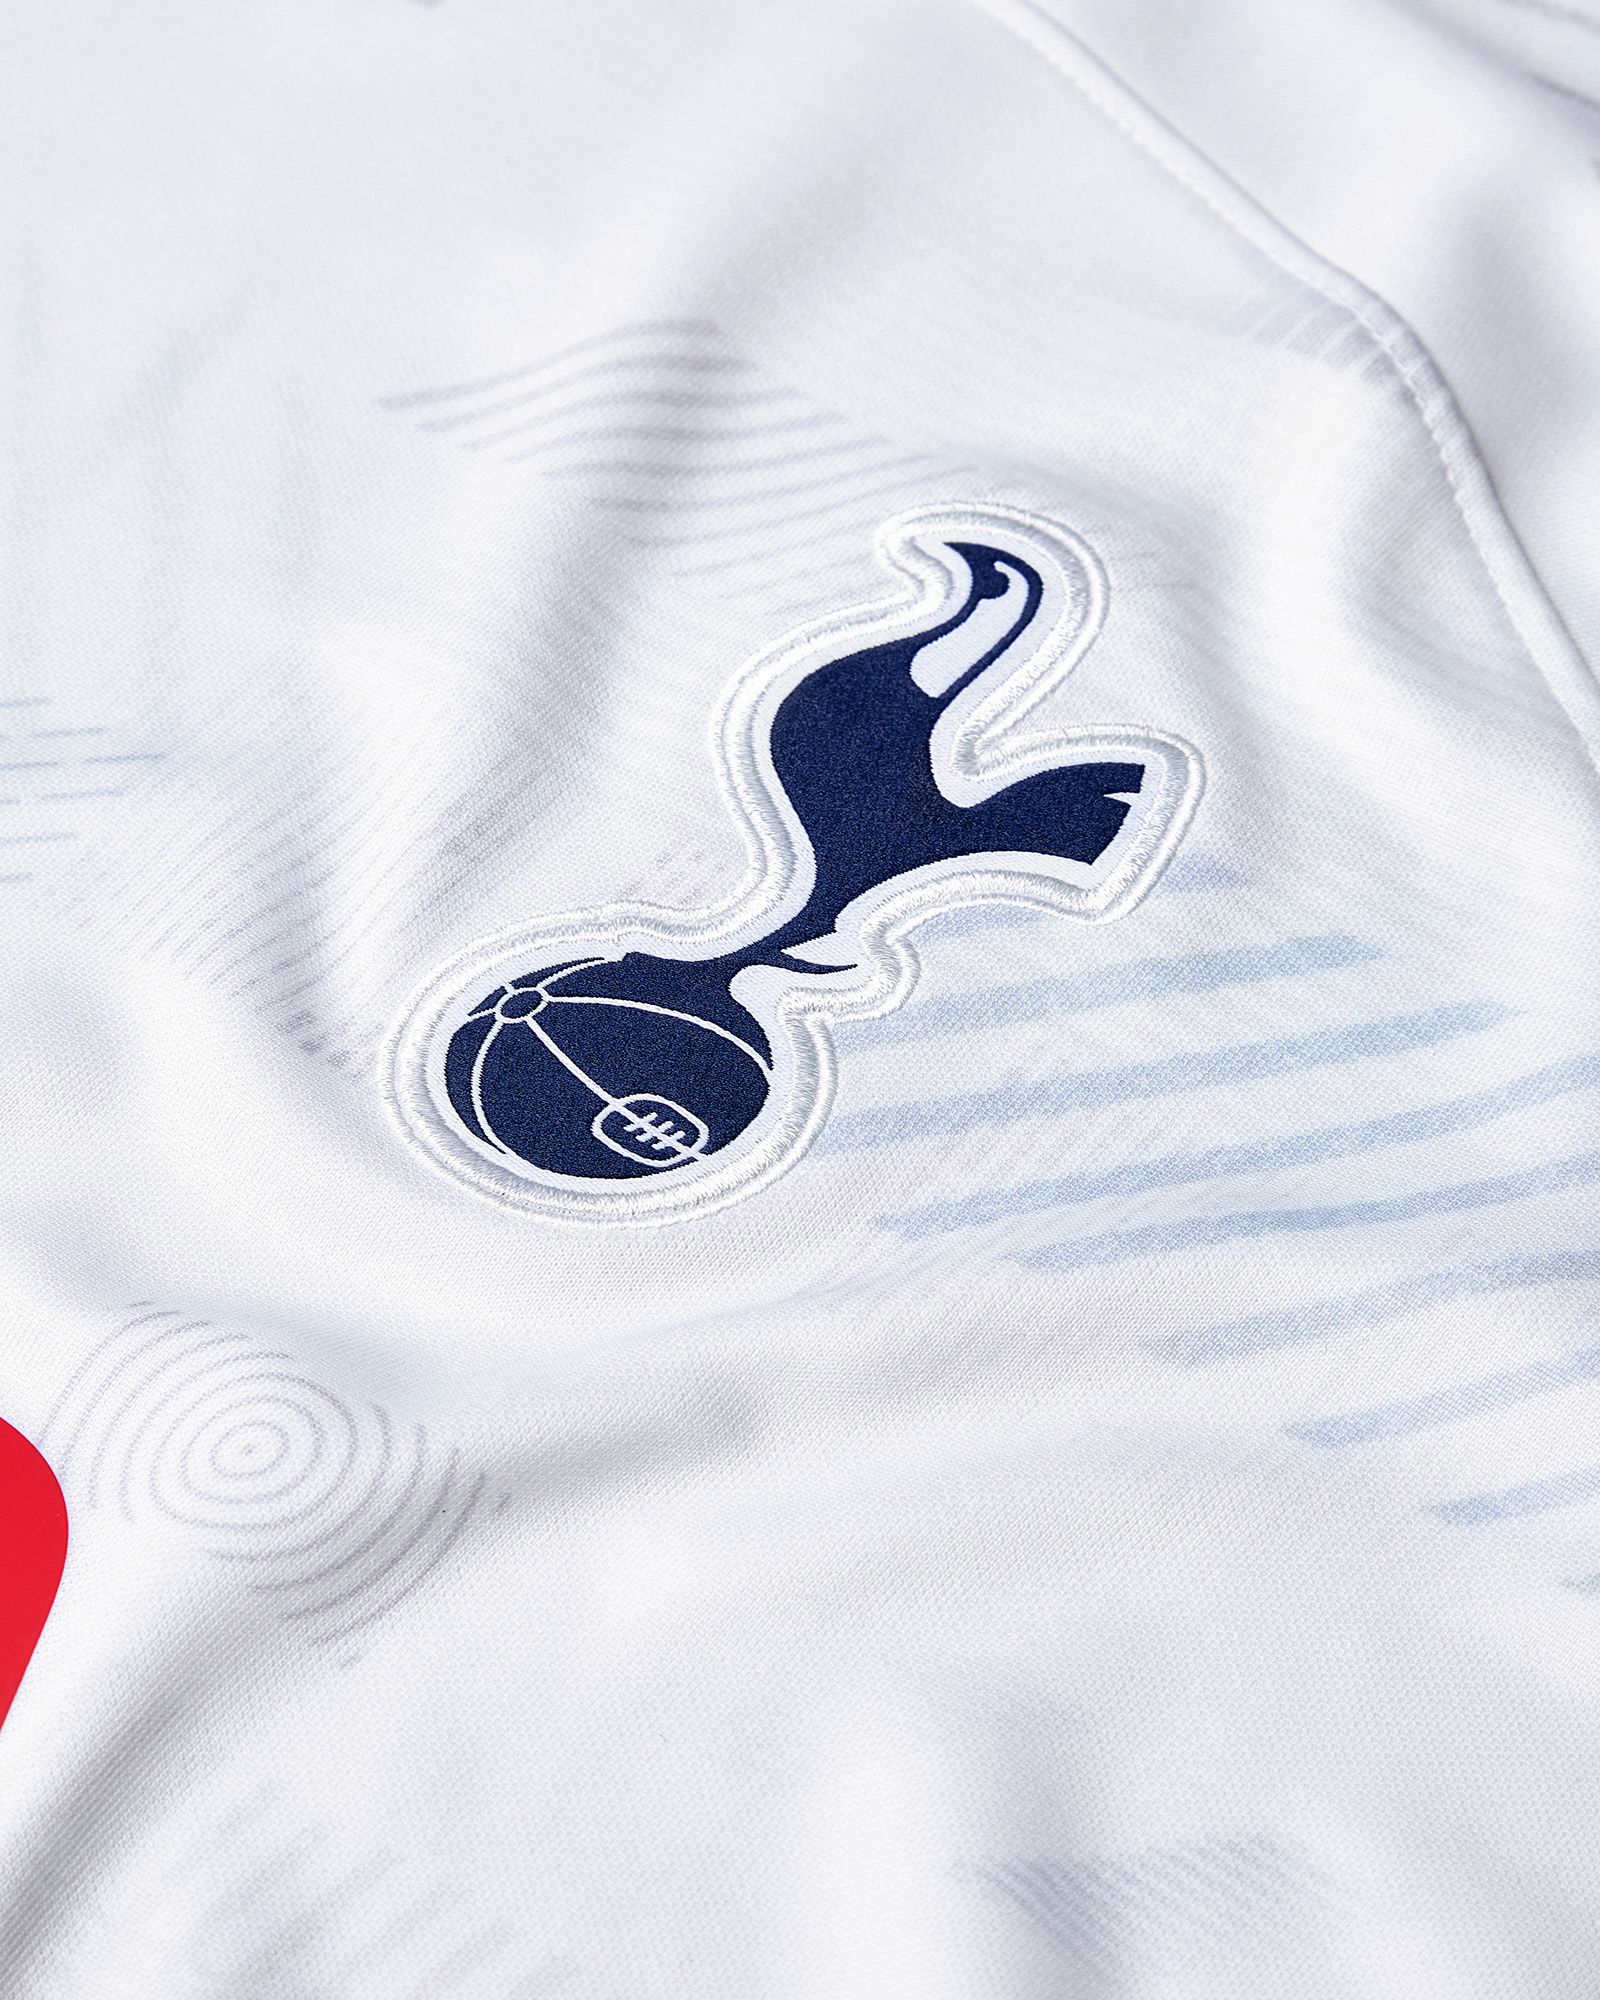 A modern classic 🤍 Introducing Spurs' 2023/24 home kit… 